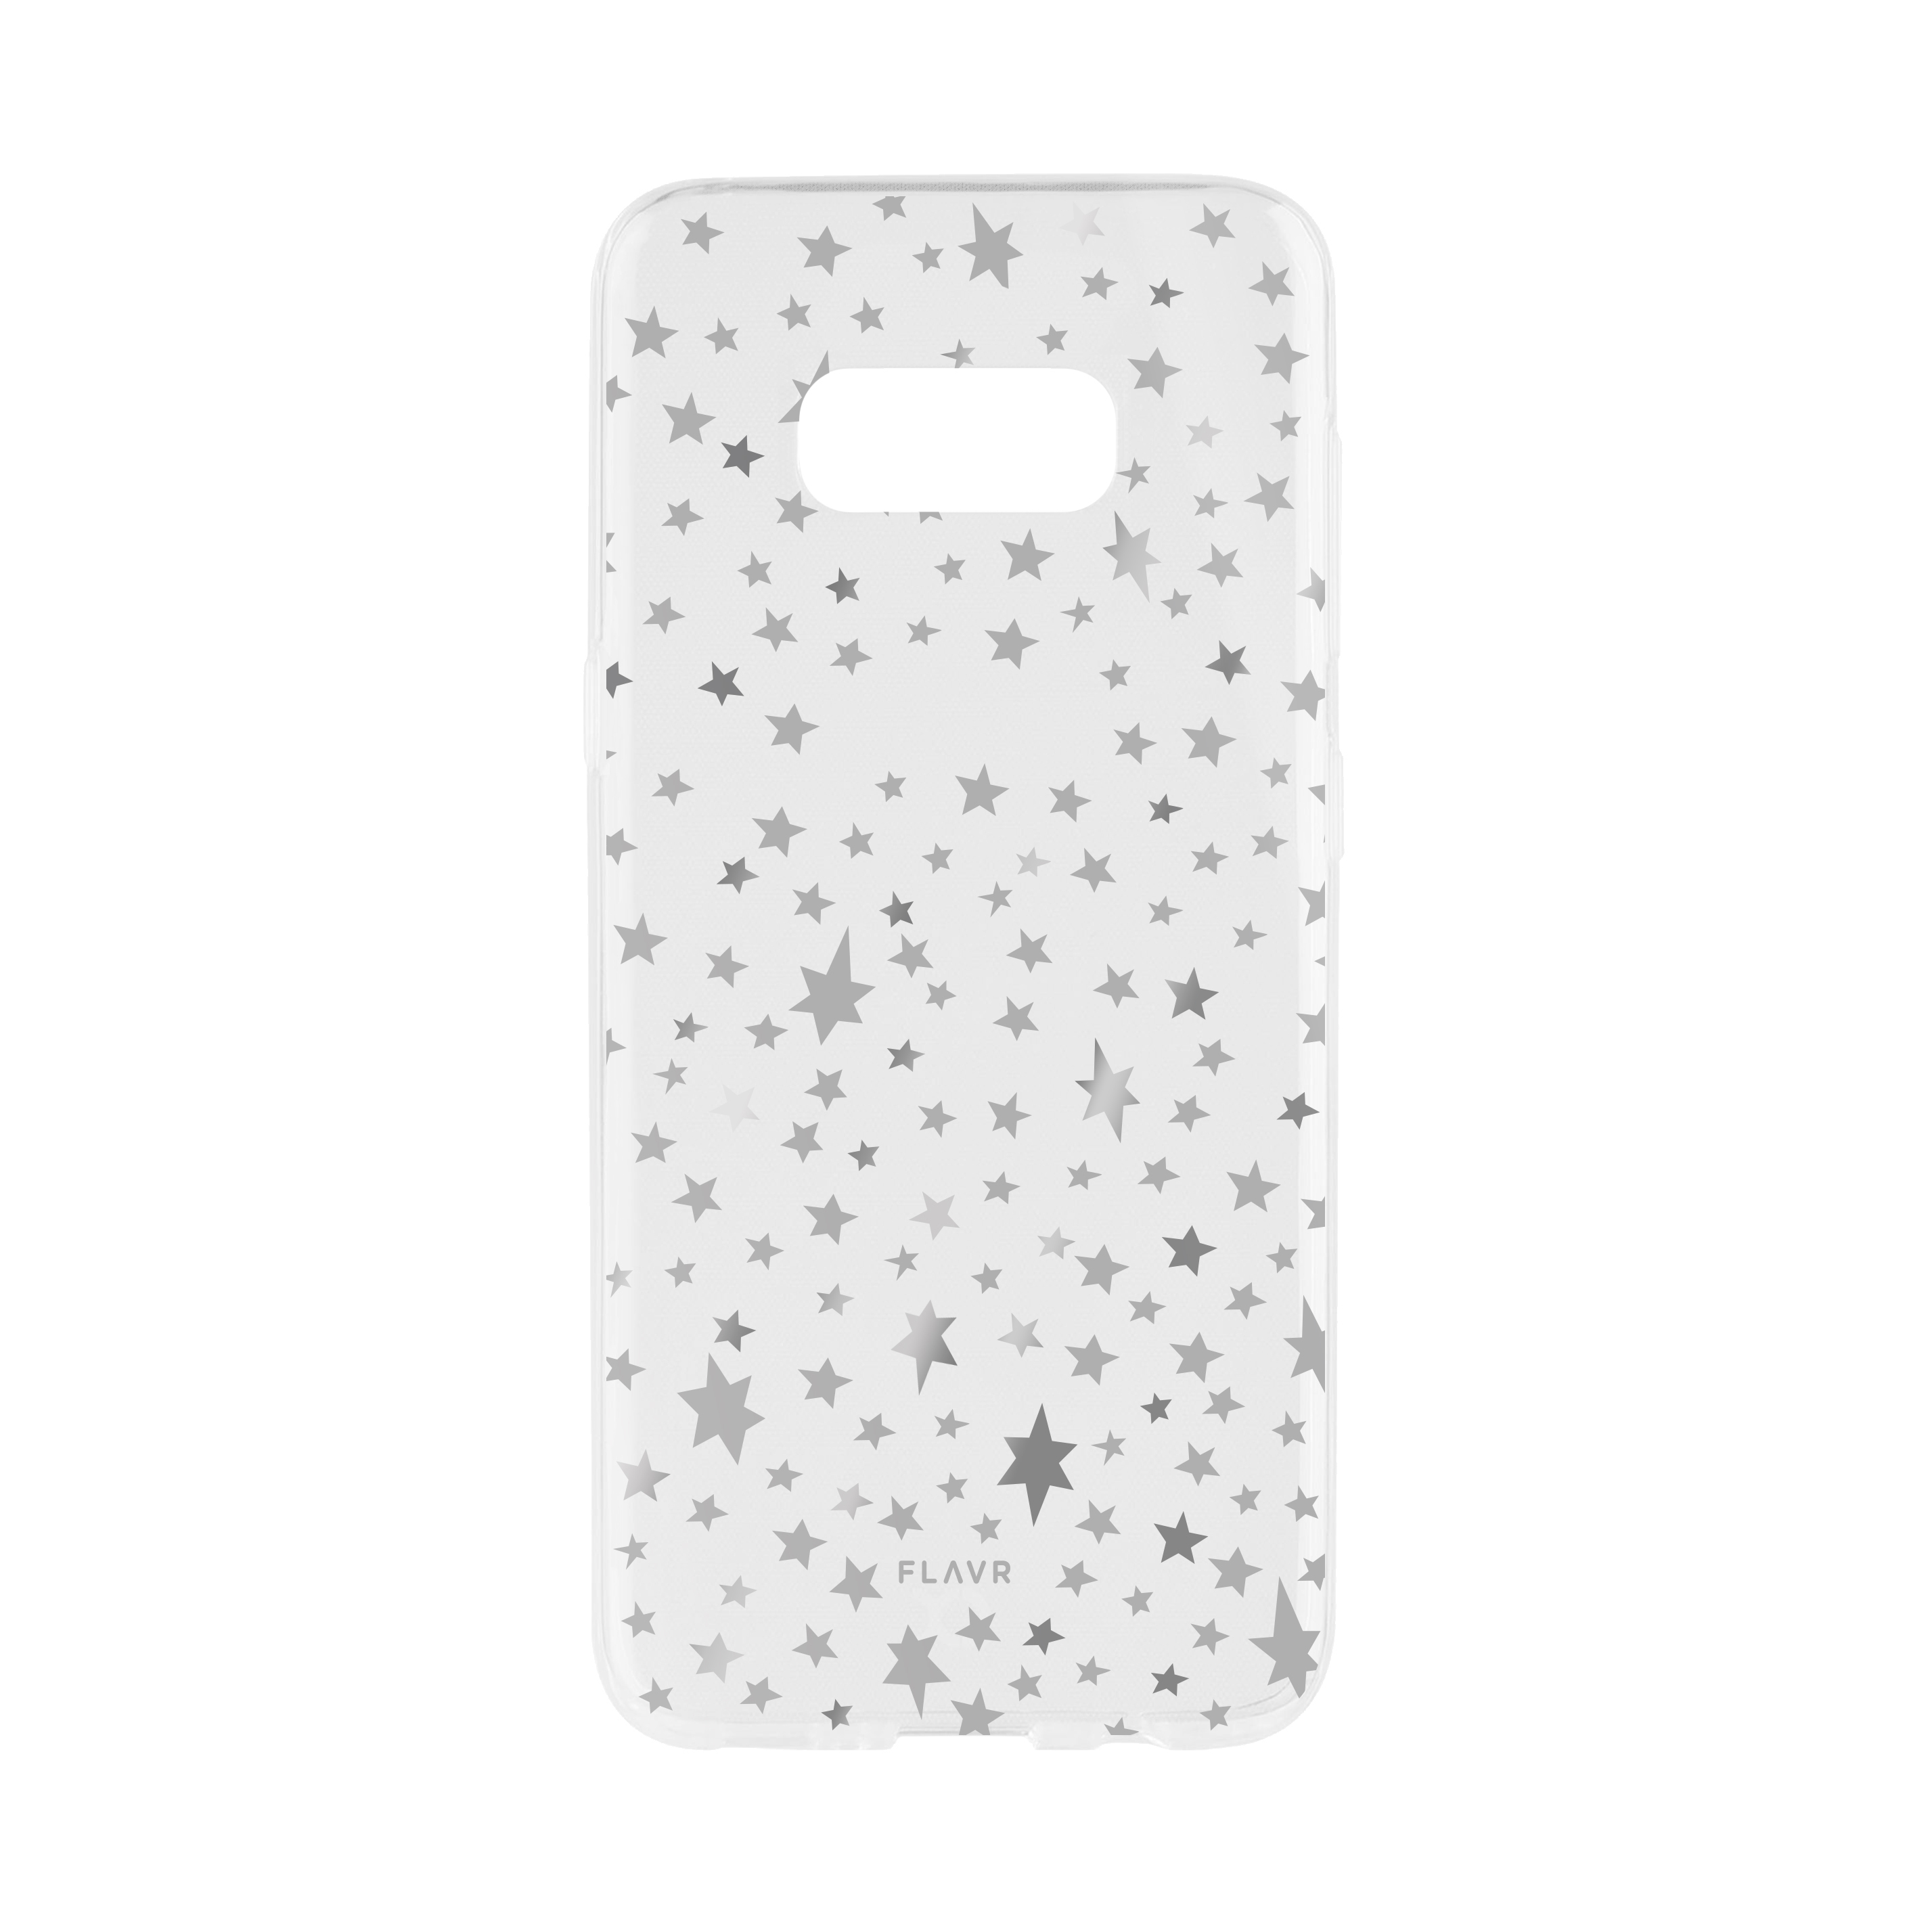 8, COLOURFUL Nights, Starry SAMSUNG, Backcover, FLAVR NOTE iPlate GALAXY